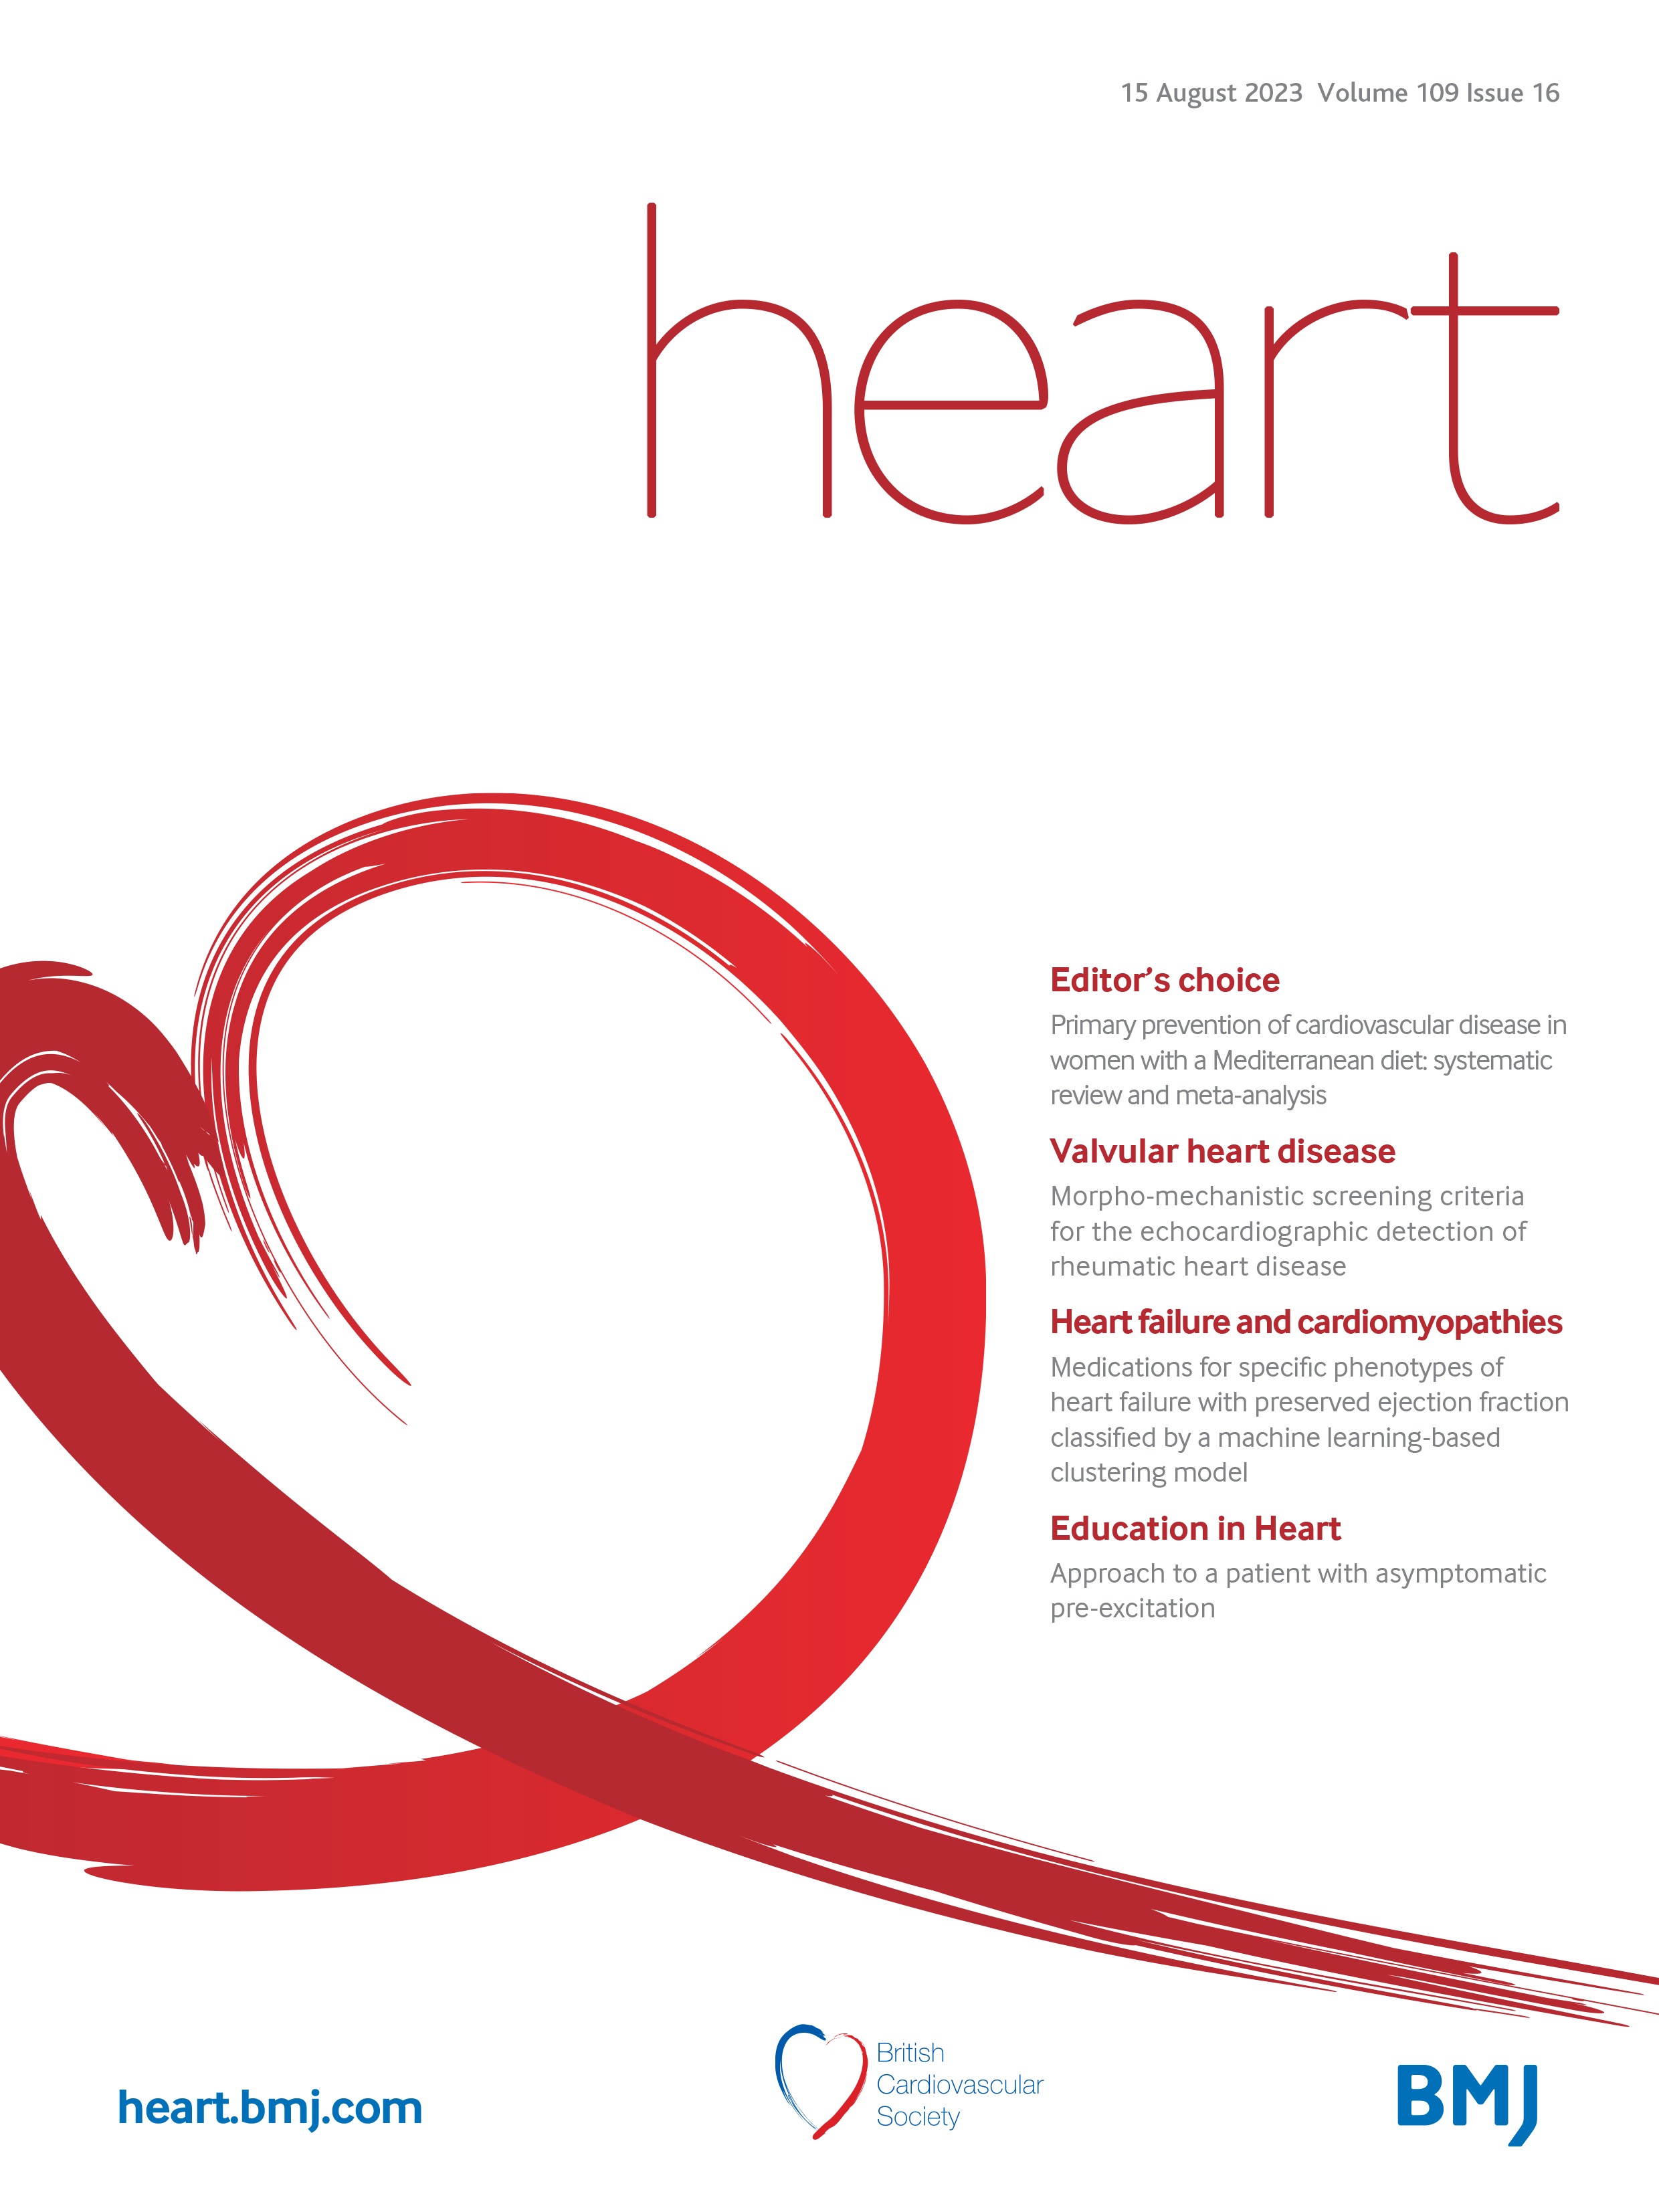 Recurrent pericardial effusion: a treatable cause not to be overlooked